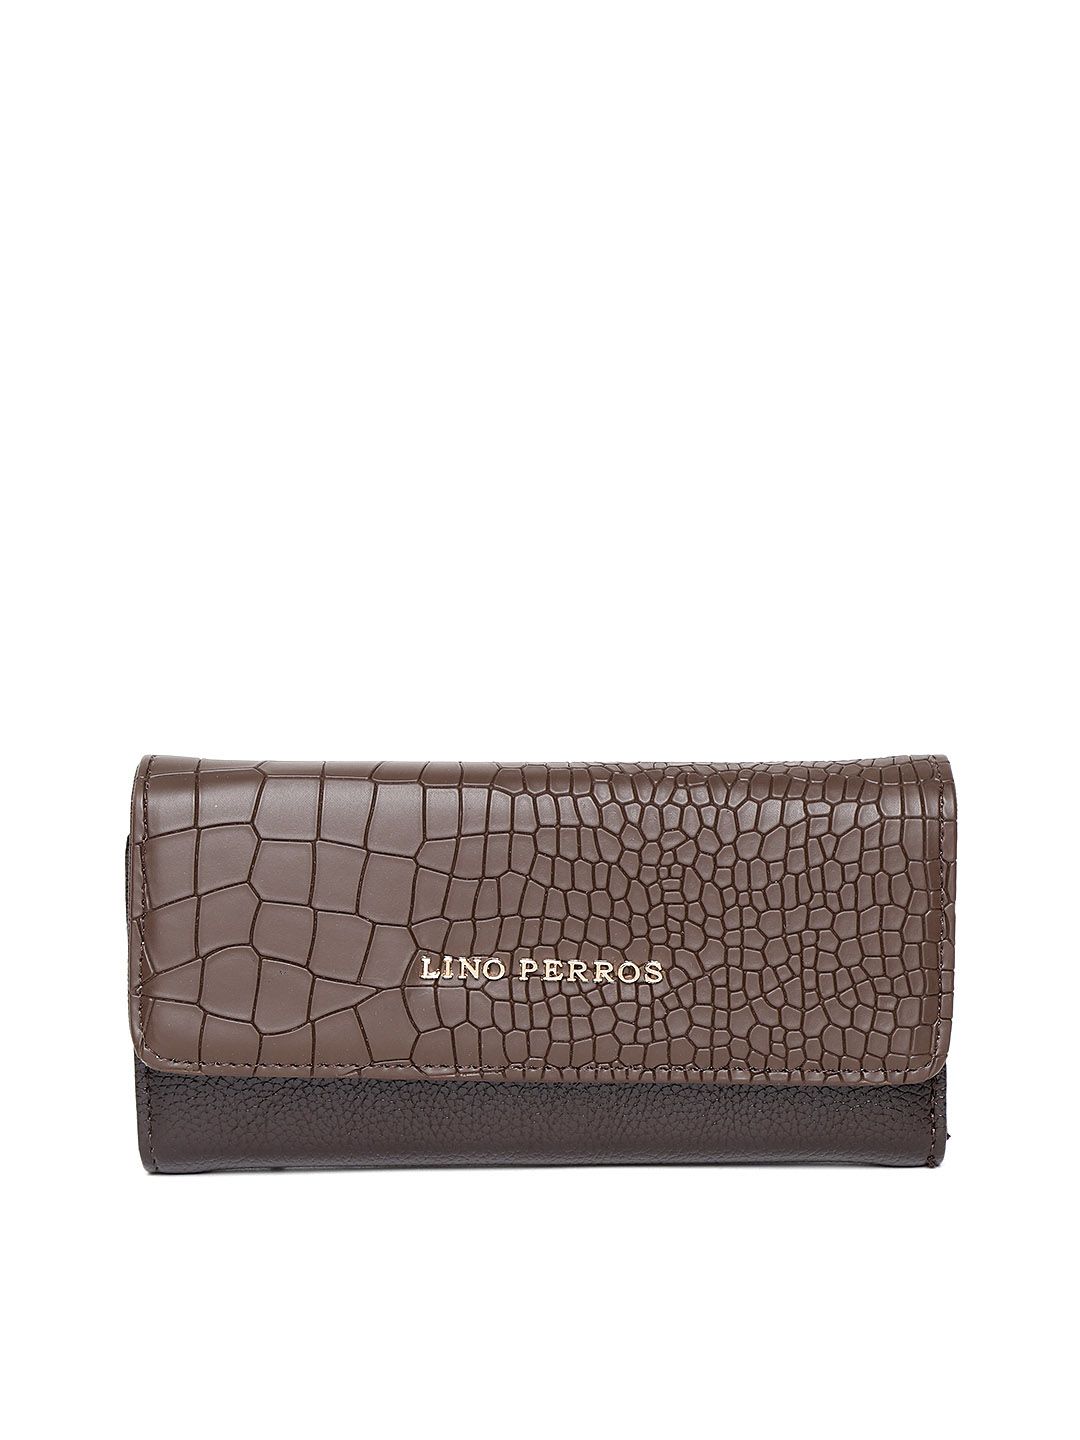 Lino Perros Women Coffee Brown Croc Textured Three Fold Wallet Price in India